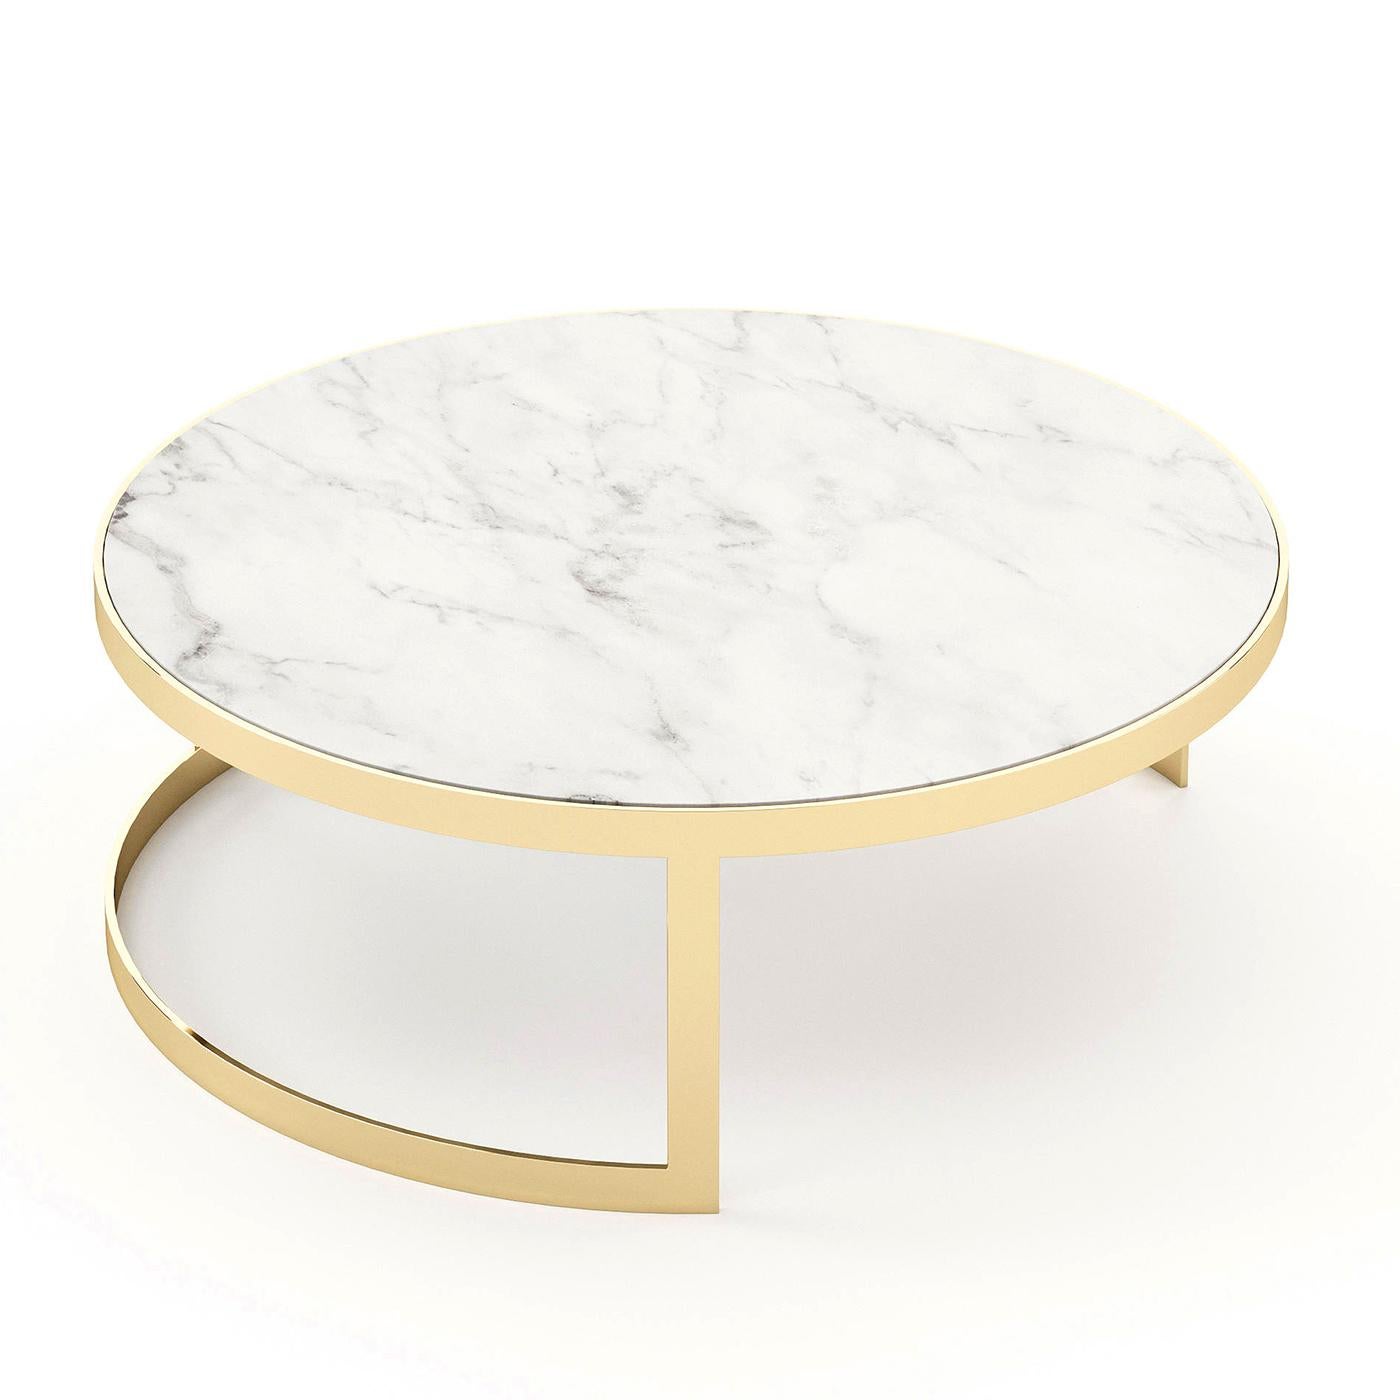 Coffee table Torent 100 with white carrara marble top
and with polished stainless steel base in gold finish.